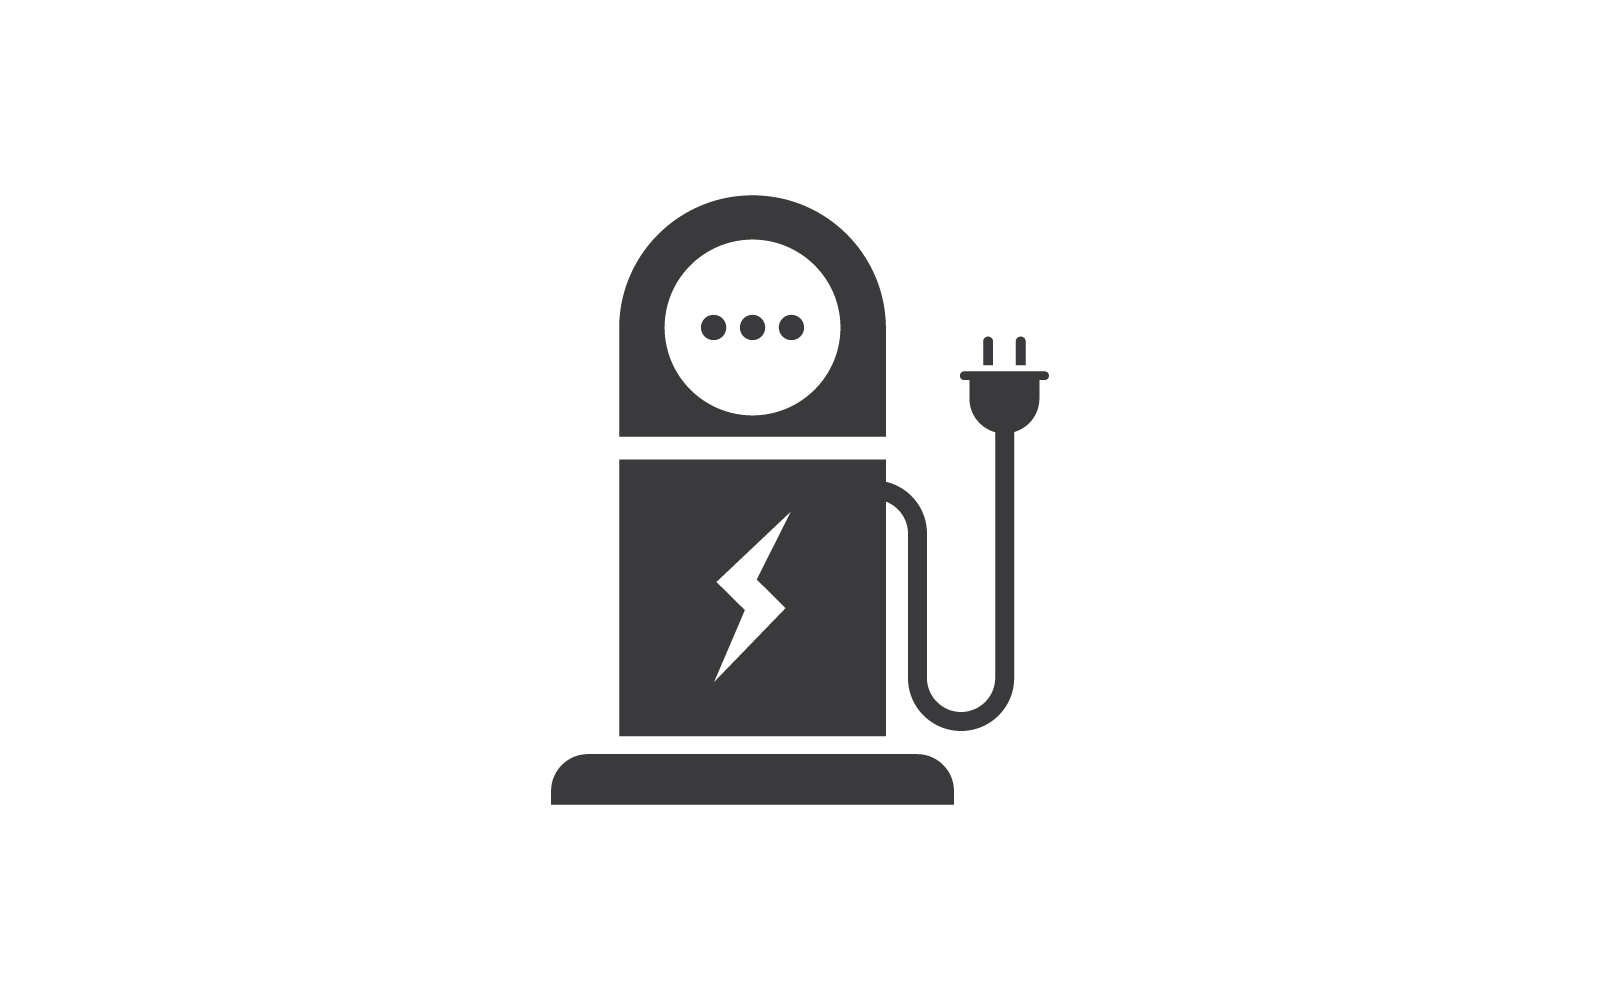 Electrical charging station illustration vector logo icon